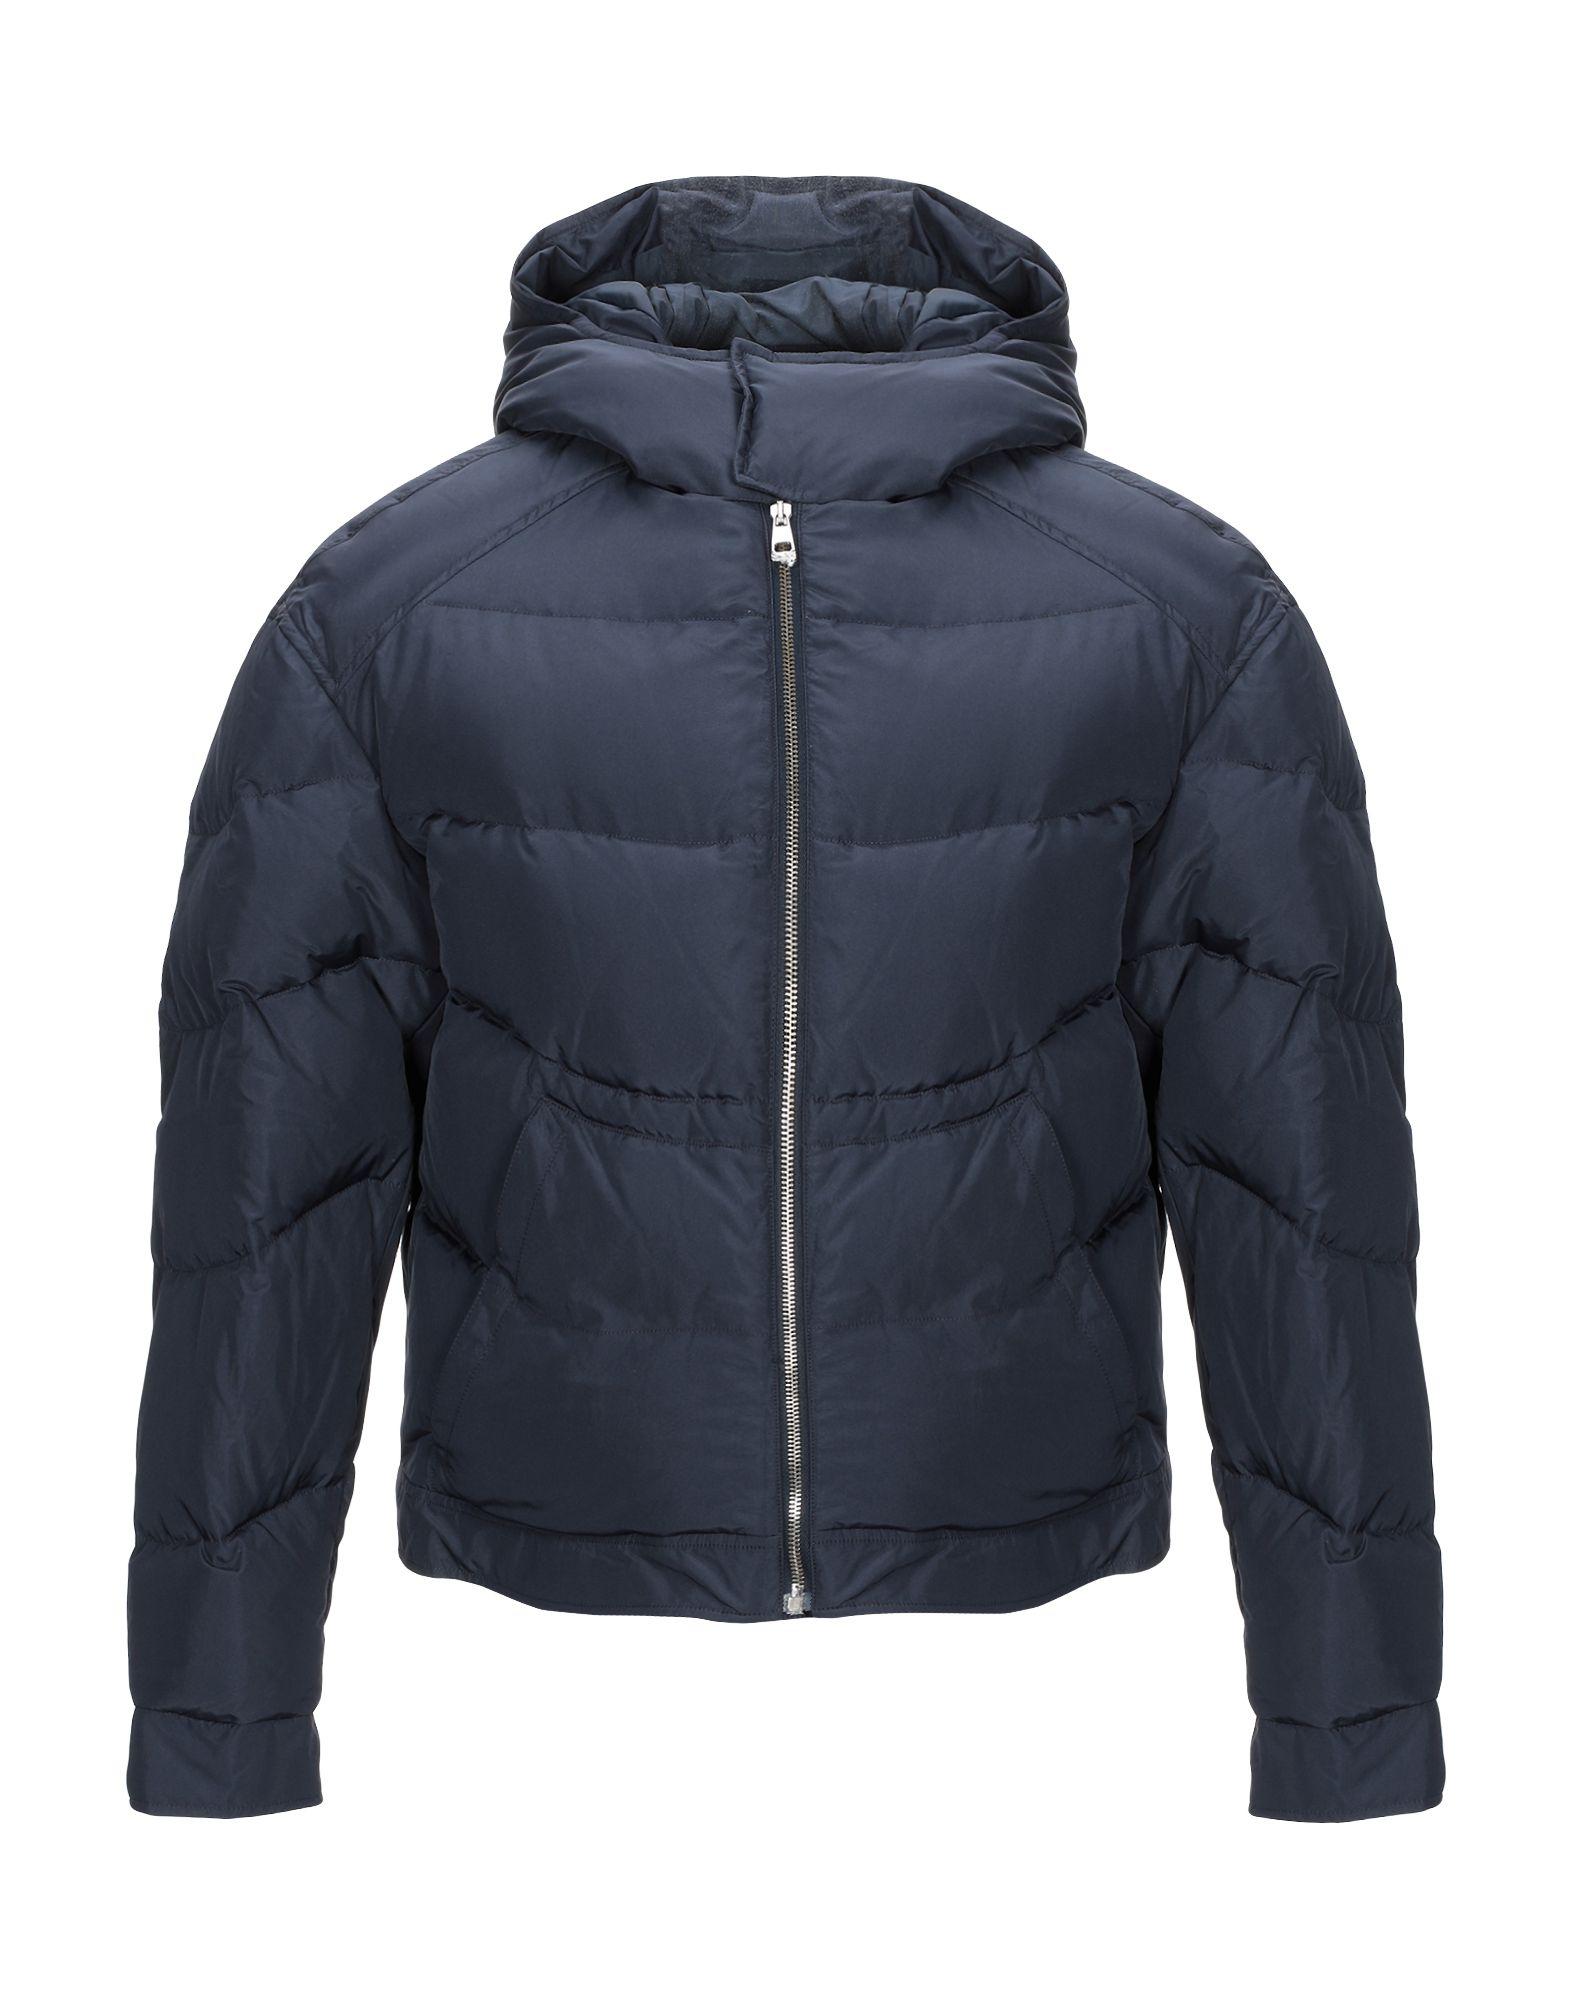 Versace Synthetic Down Jacket in Dark Blue (Blue) for Men - Lyst